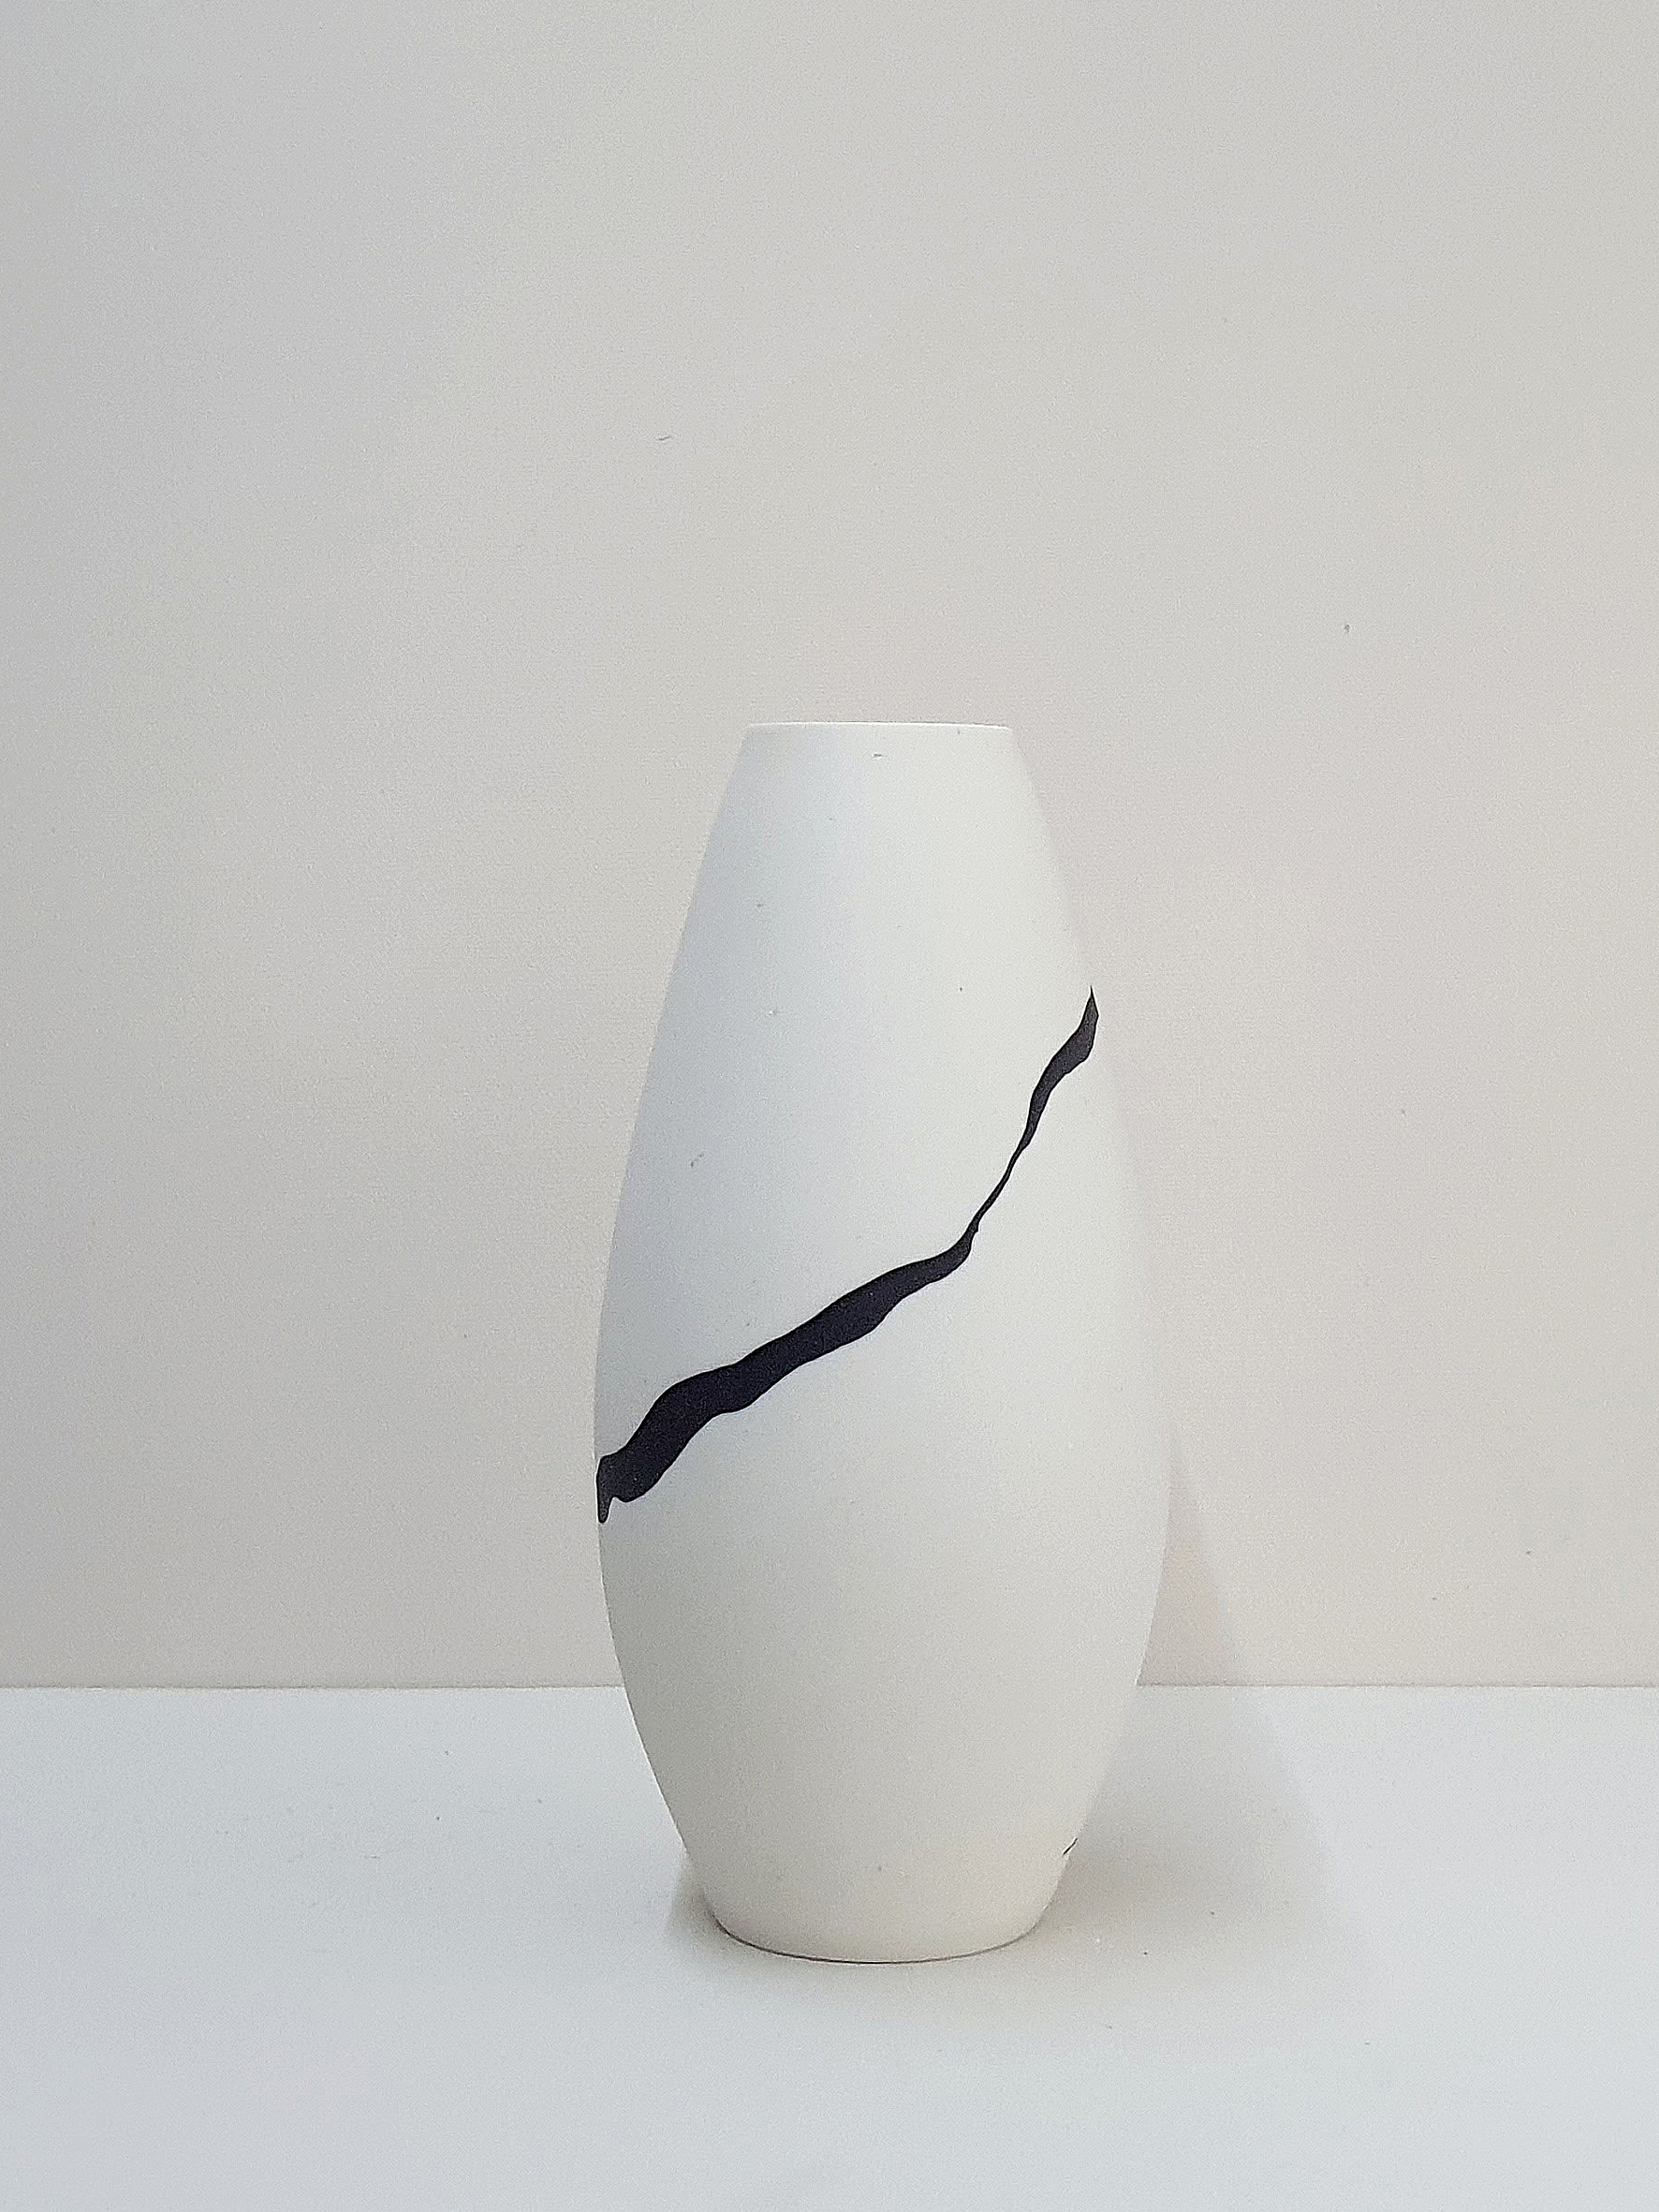 Leonie Rutter, Vessel 453 White wheel thrown porcelain vessel, inlaid with black ribbon £80